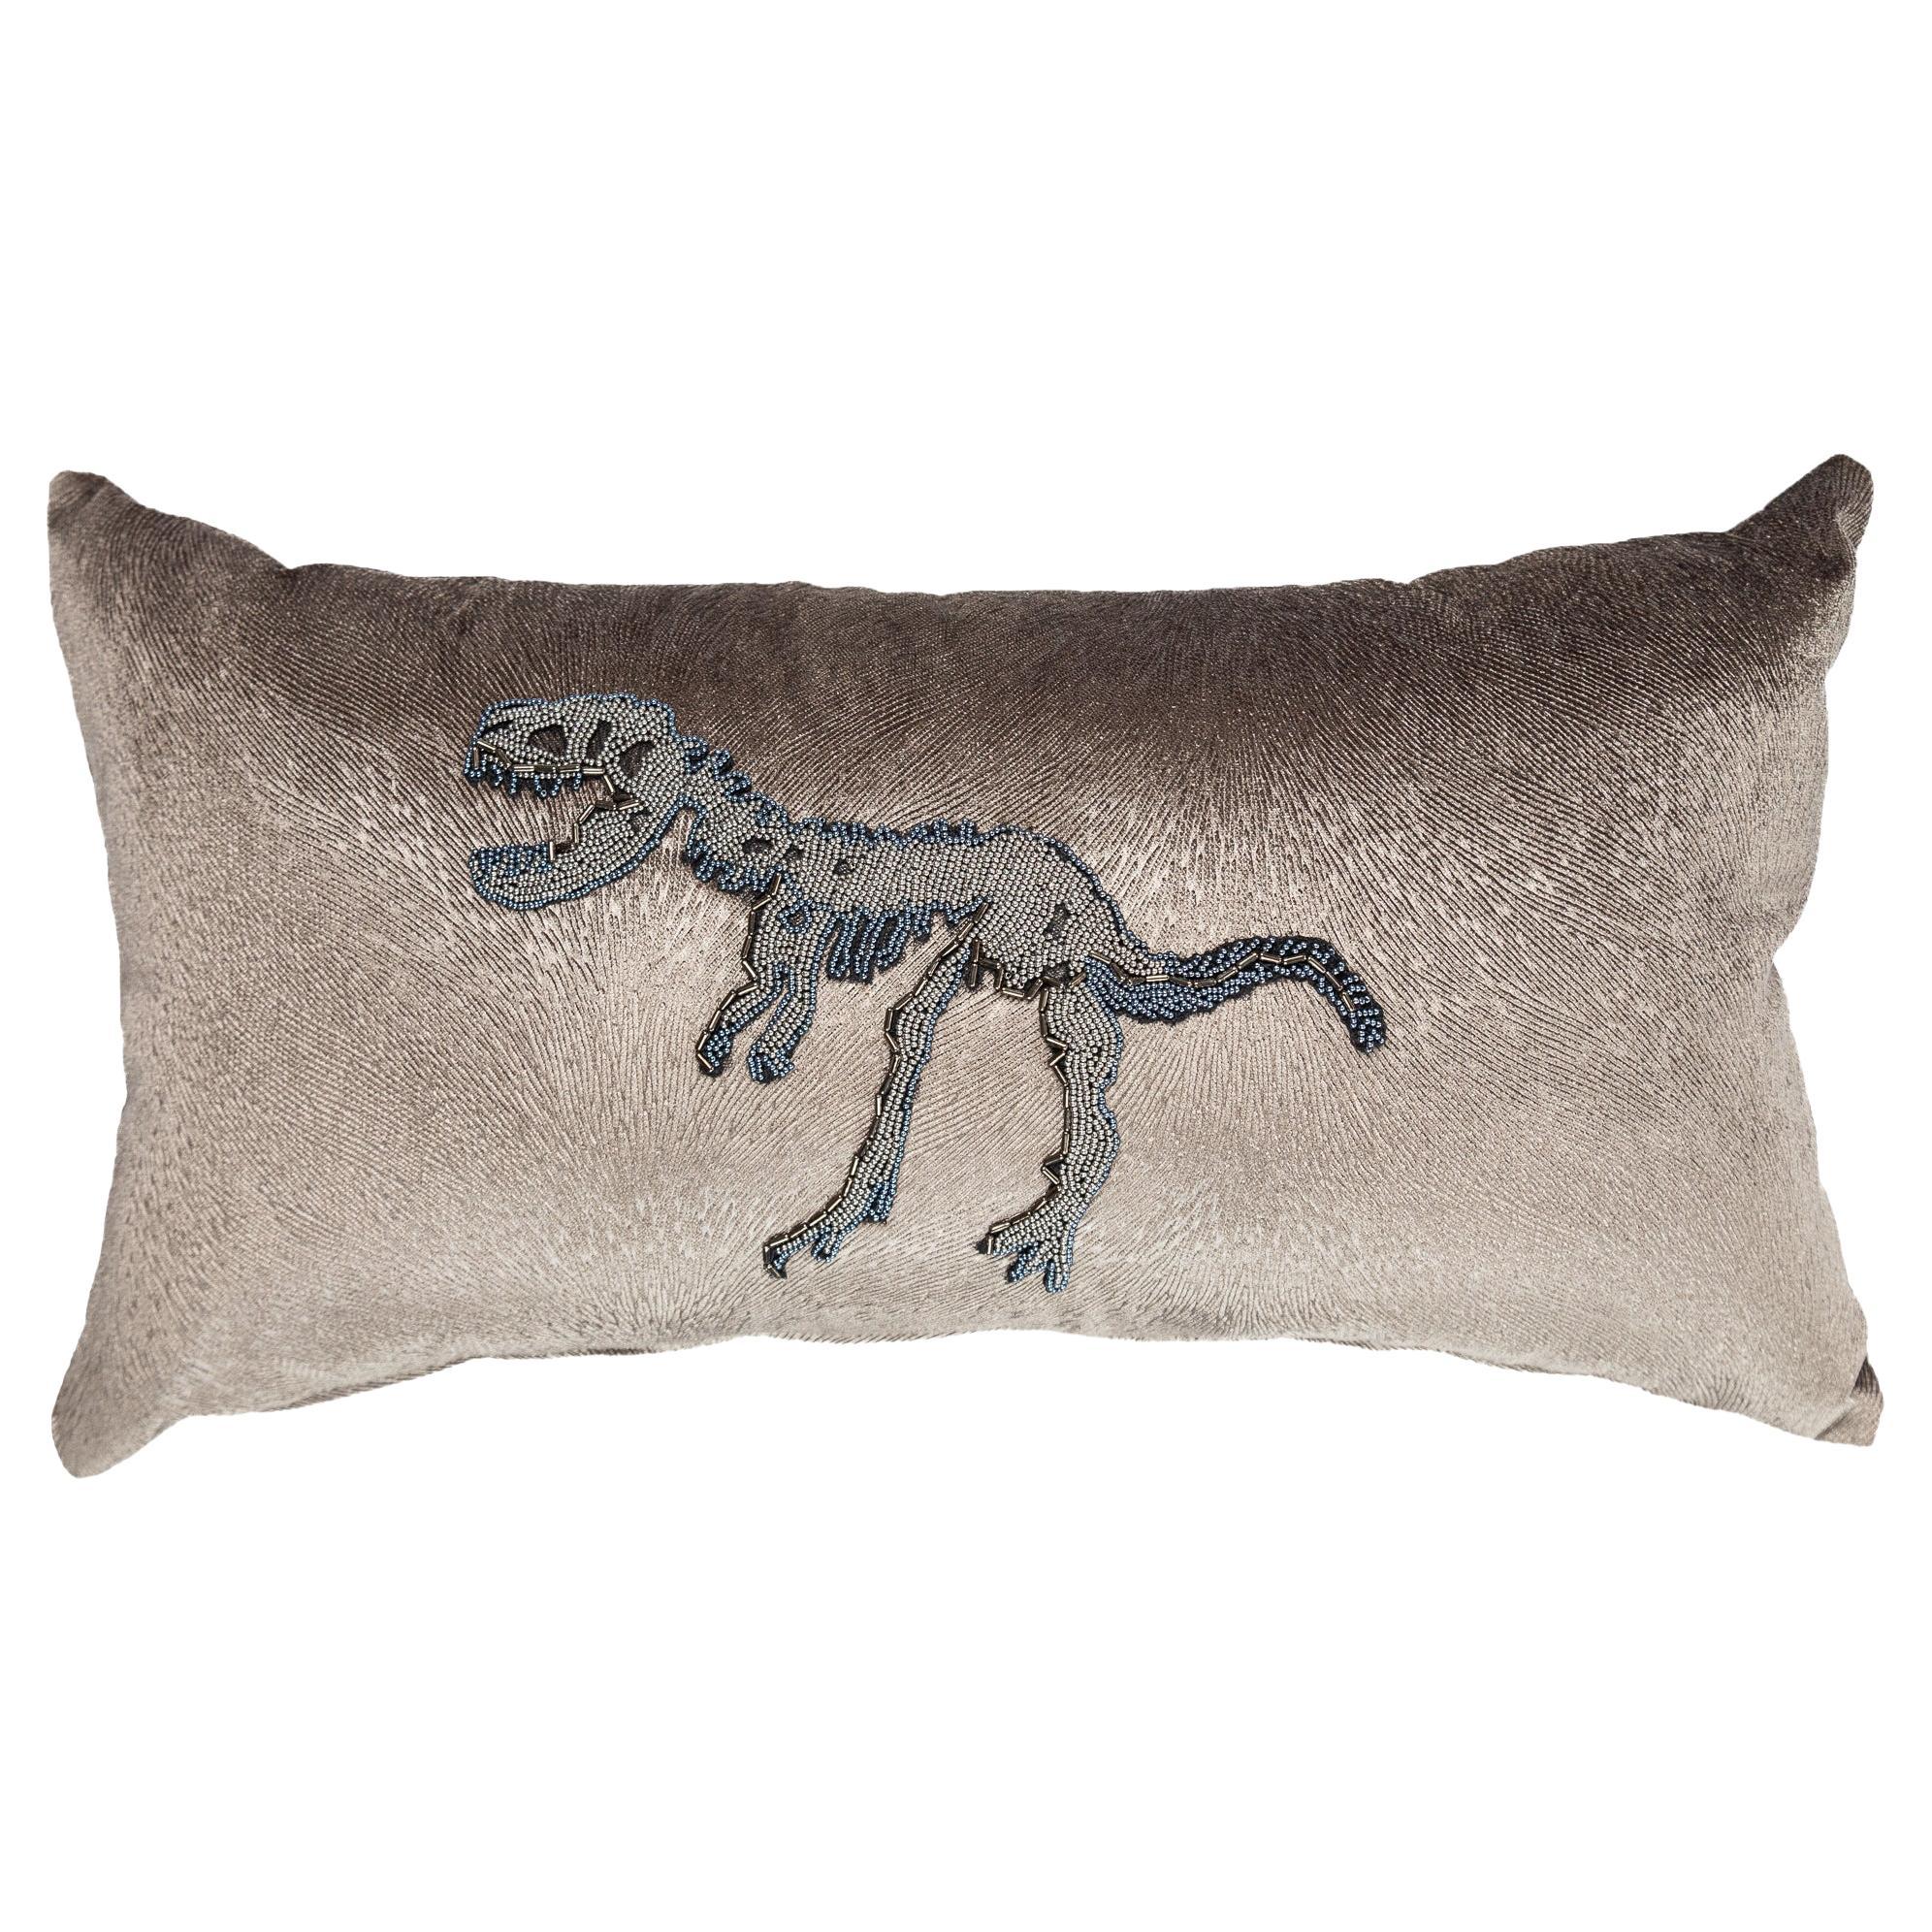 Velvet throw pillow & hand made embroidery - REX- by Mar de Doce For Sale